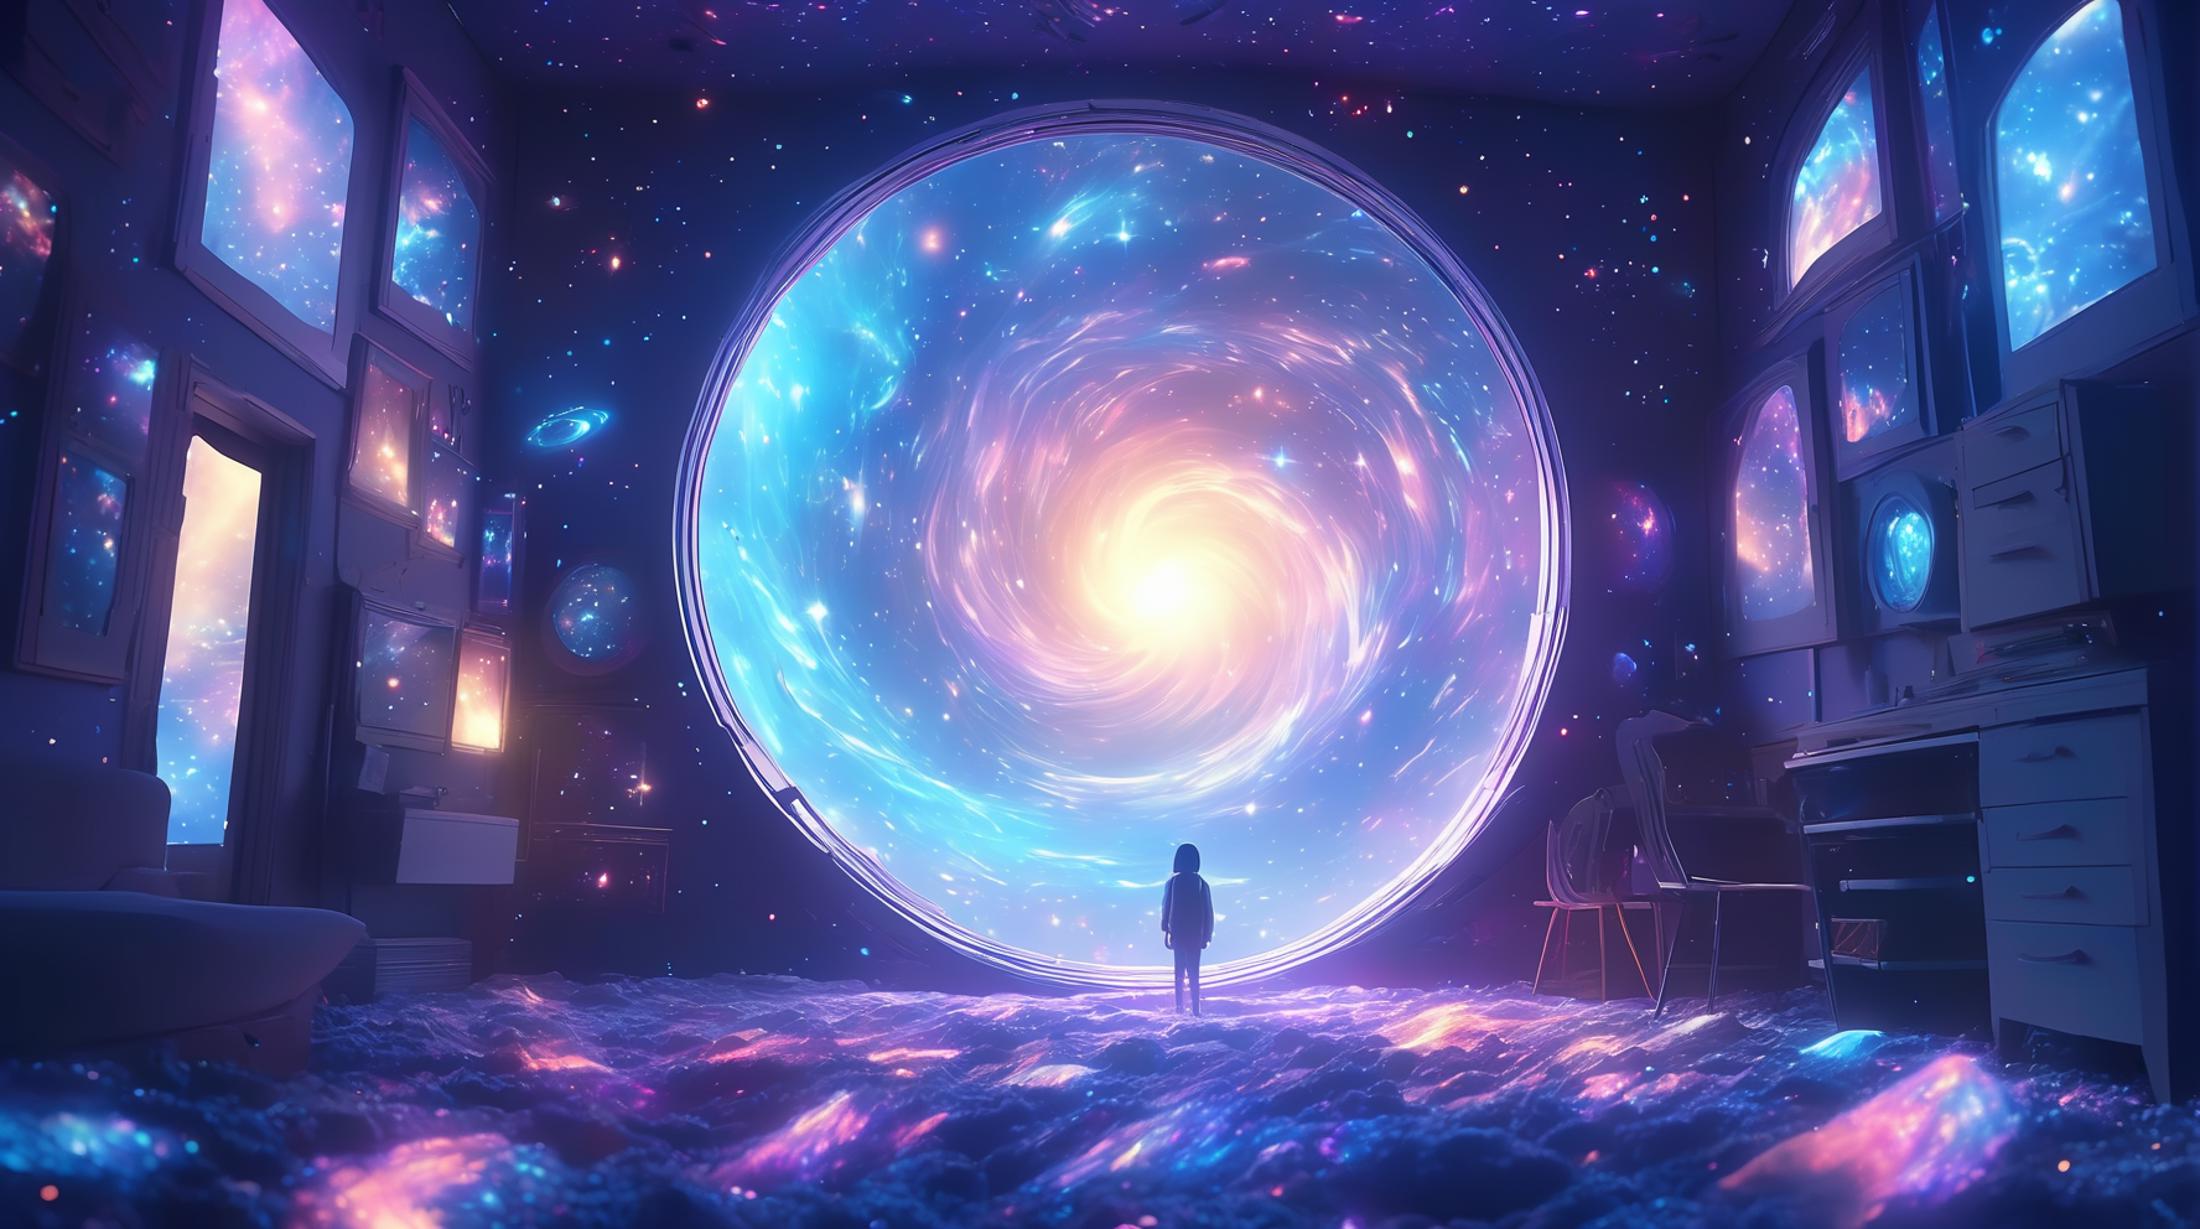 A young girl standing in front of a large, colorful spiral galaxy poster.